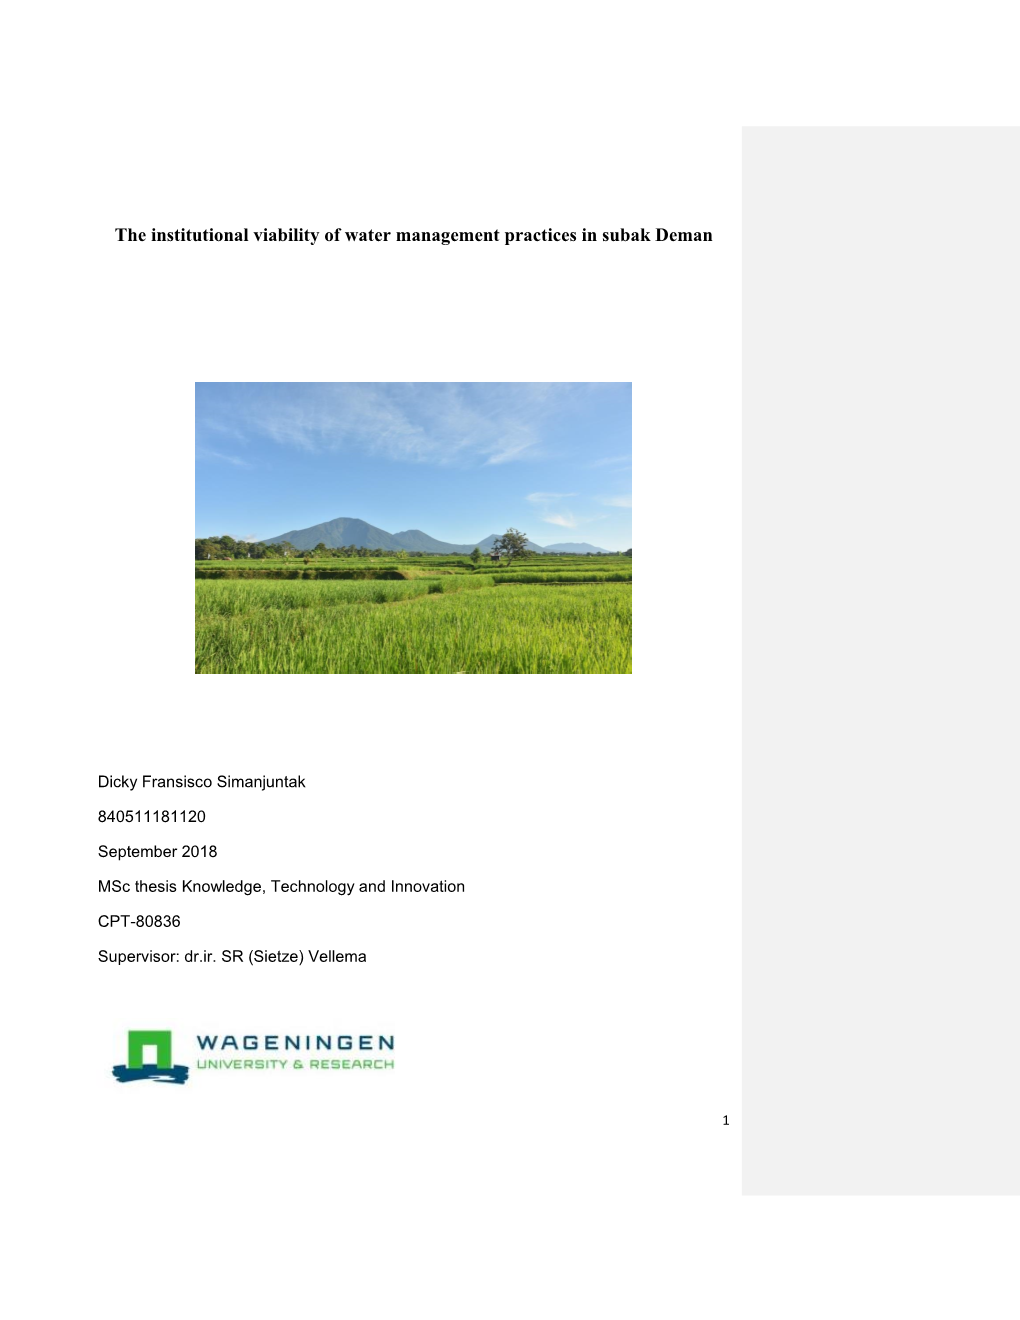 The Institutional Viability of Water Management Practices in Subak Deman